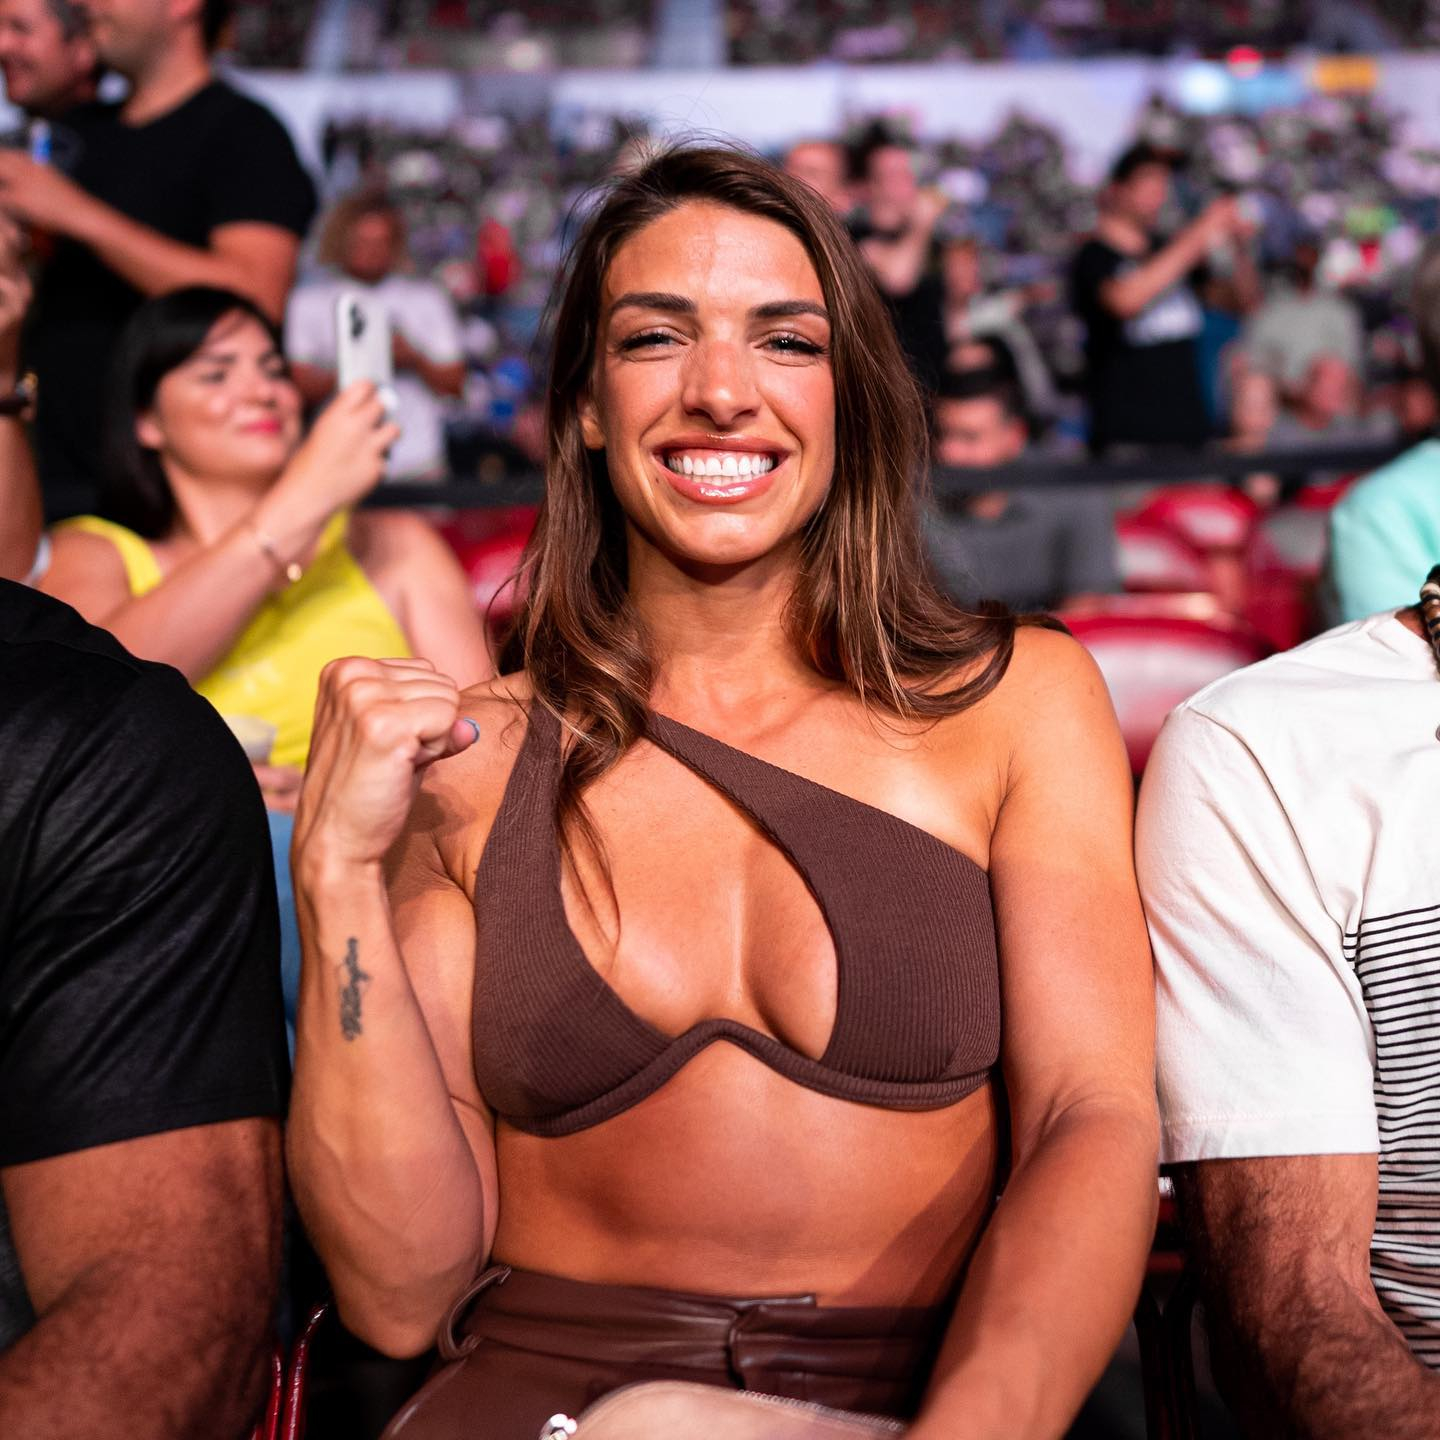 billy trussell recommends mackenzie dern hot pic